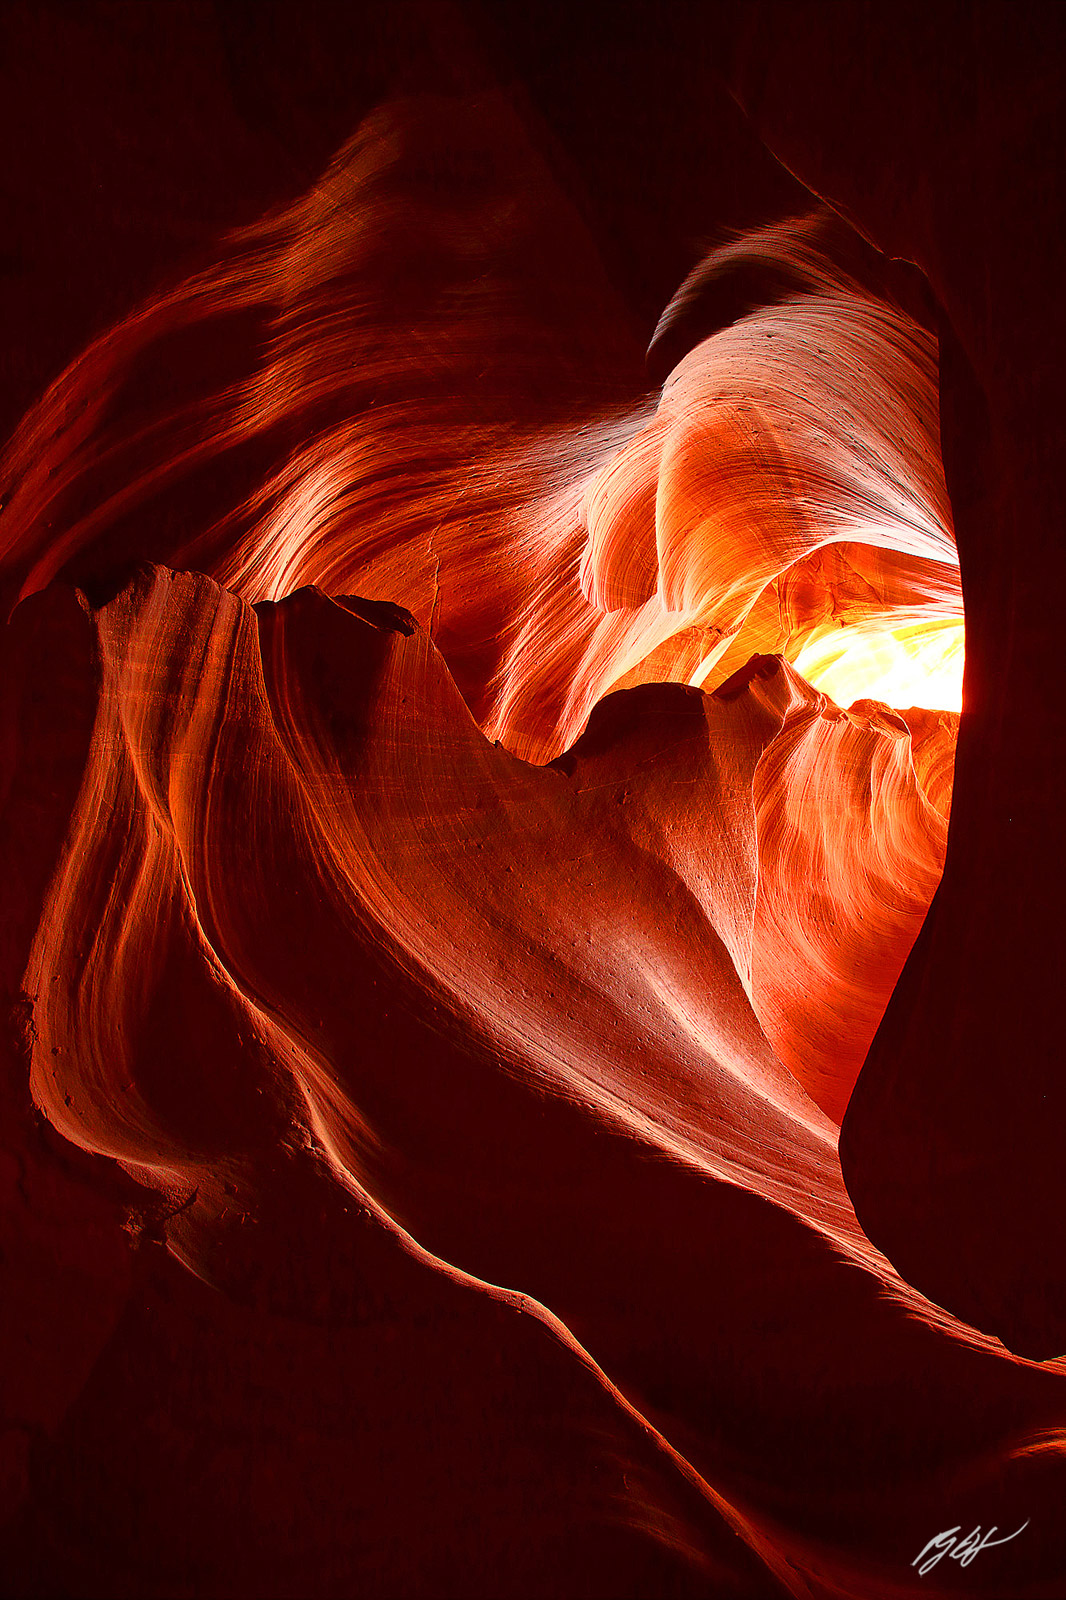 The Heart Formation in Upper Antelope Canyon, Lake Powell Navajo Tribal Park in Arizona